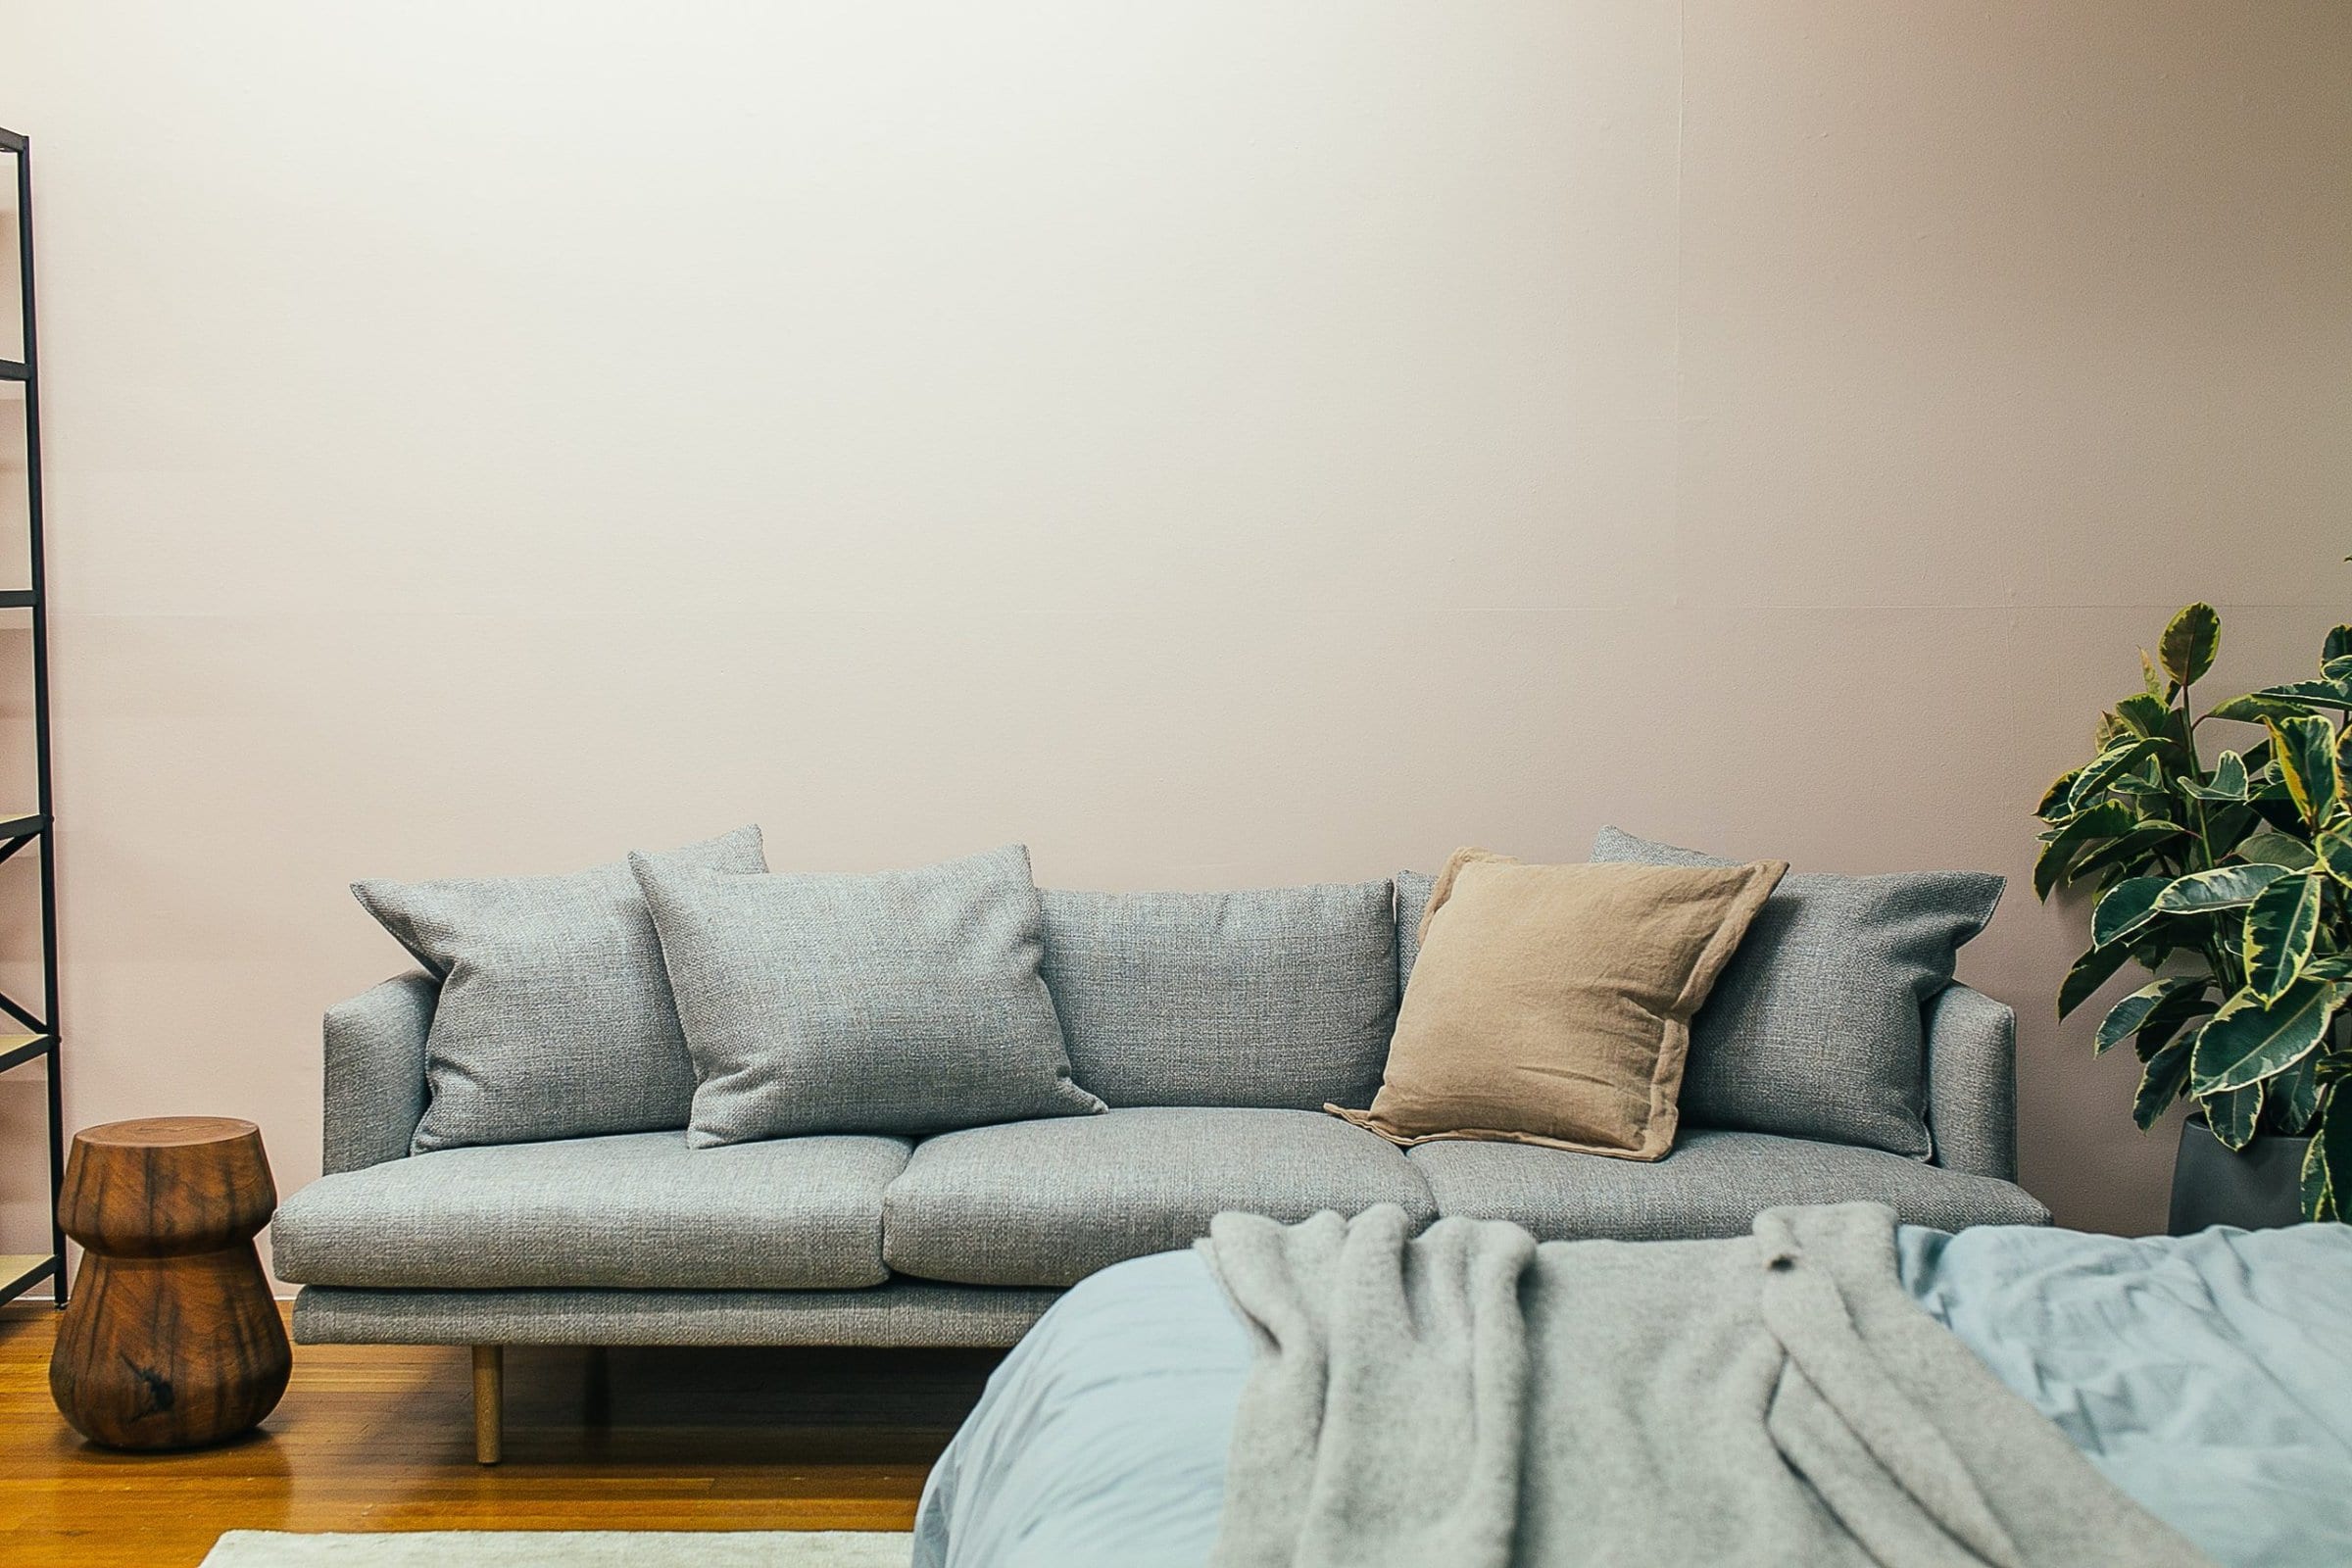  Gray Couch in Front of Beige Wall scaled